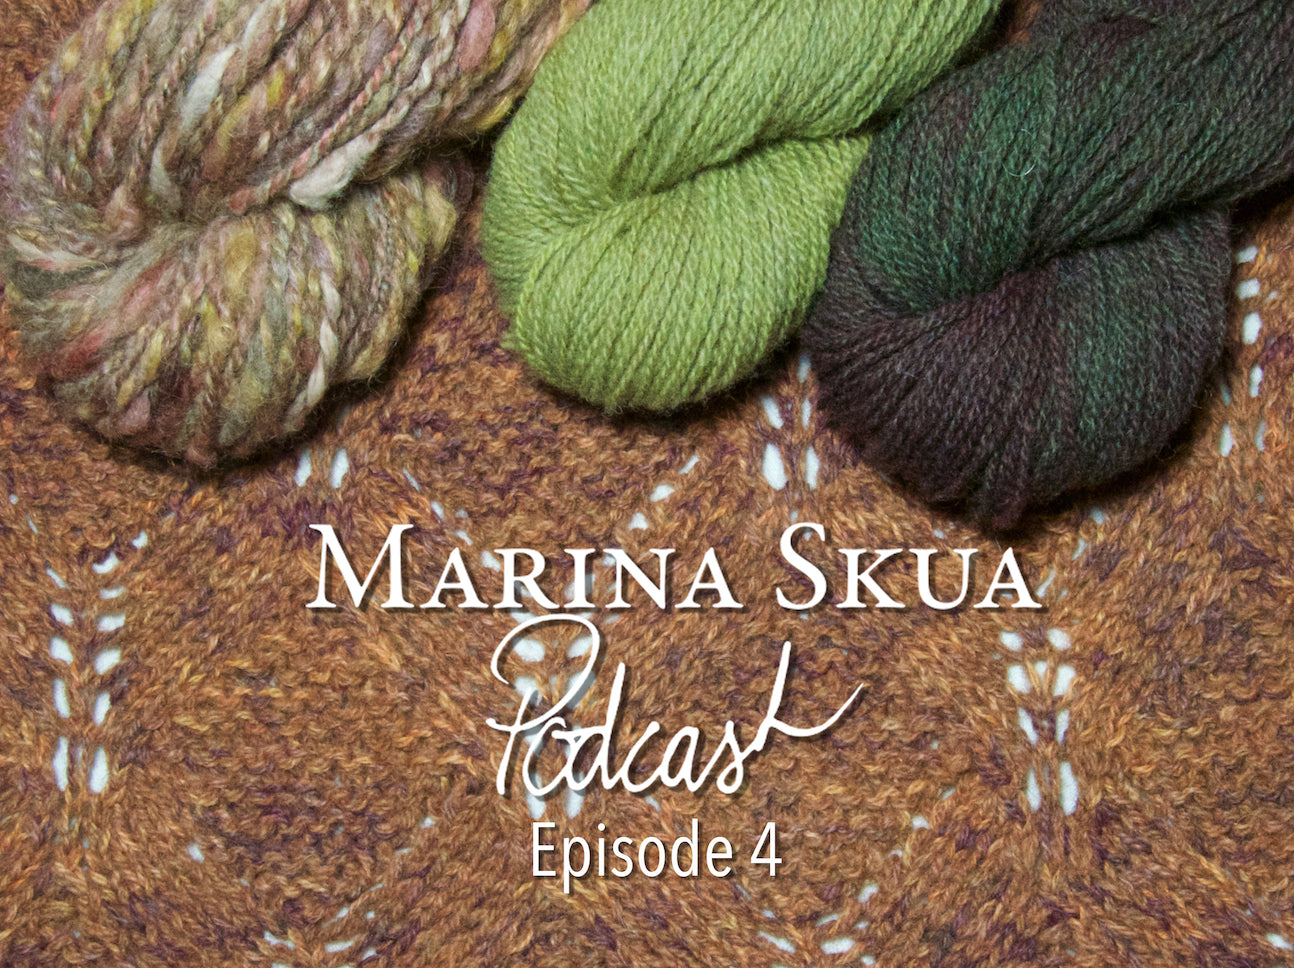 Episode 4 of the Podcast – A love of orange, darning socks and making calendula oil